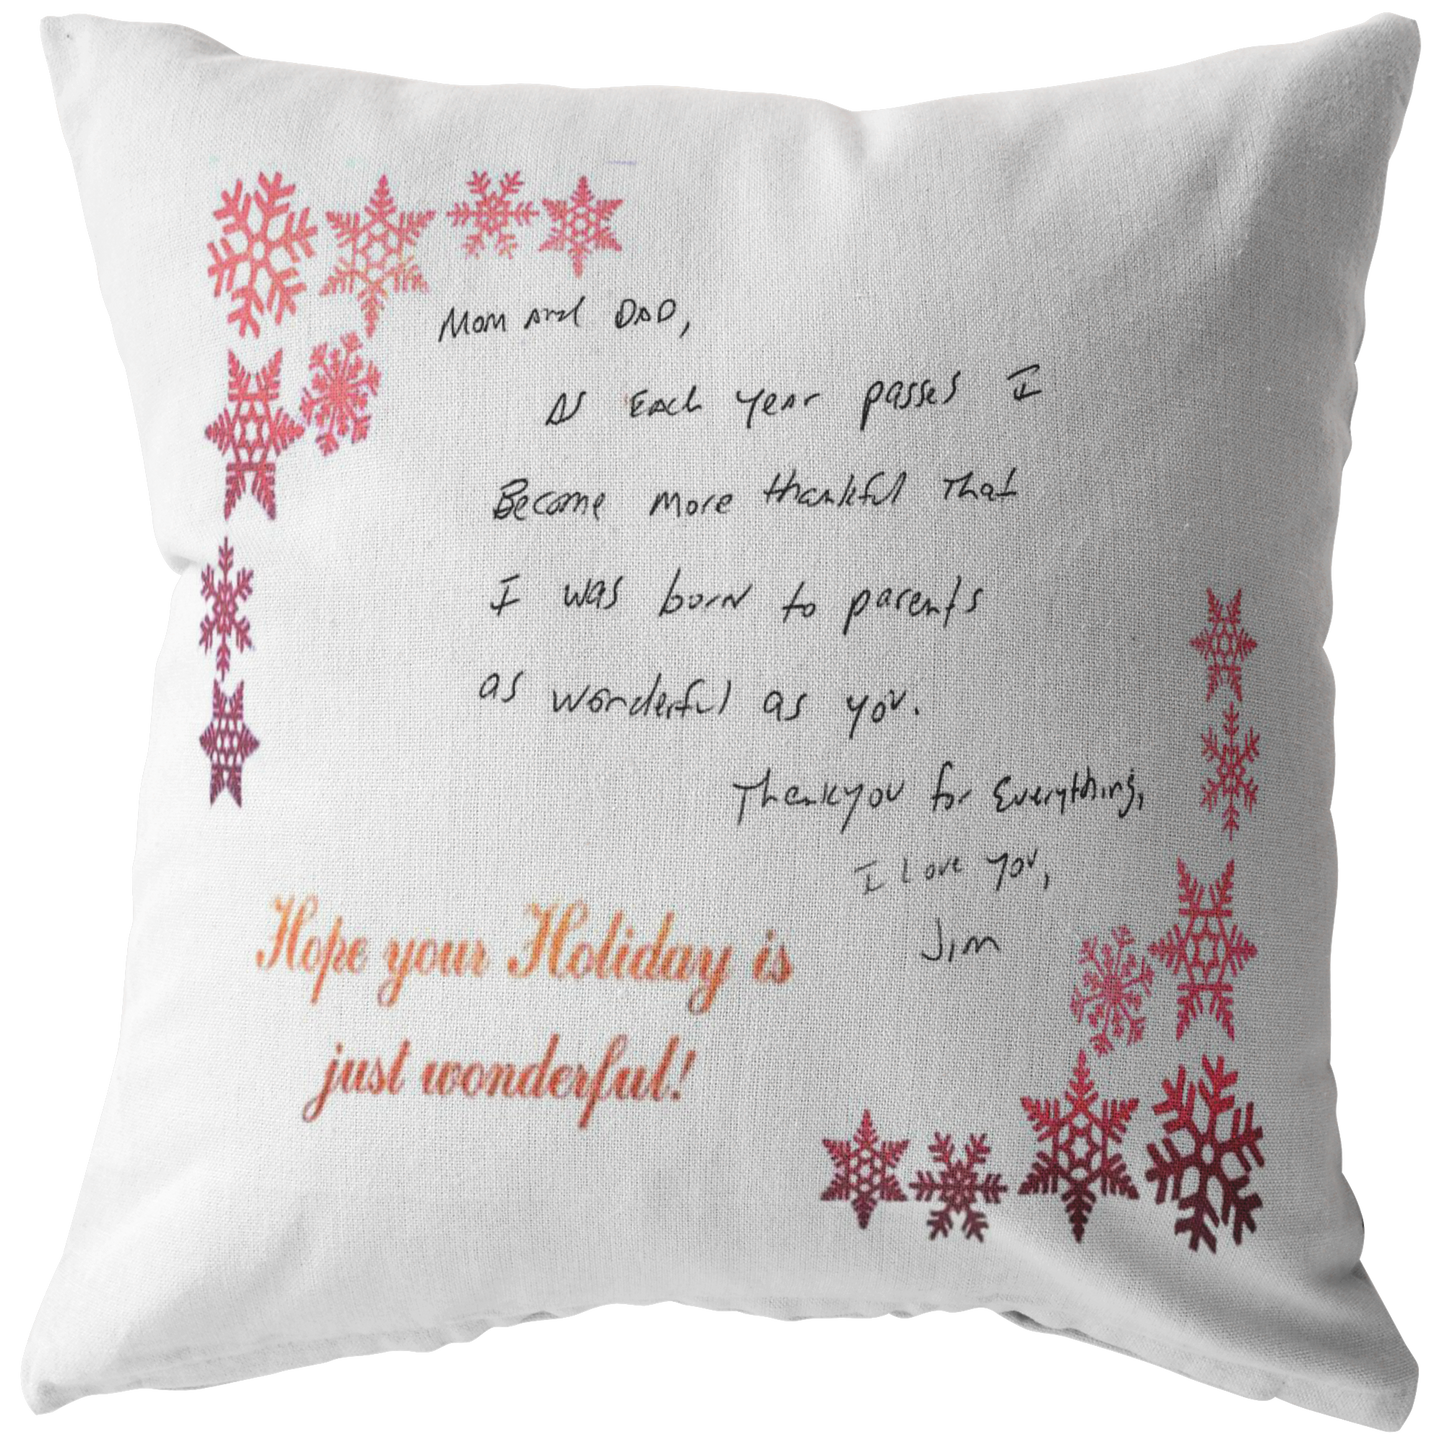 Personalized Pillows with Handwritten Letter